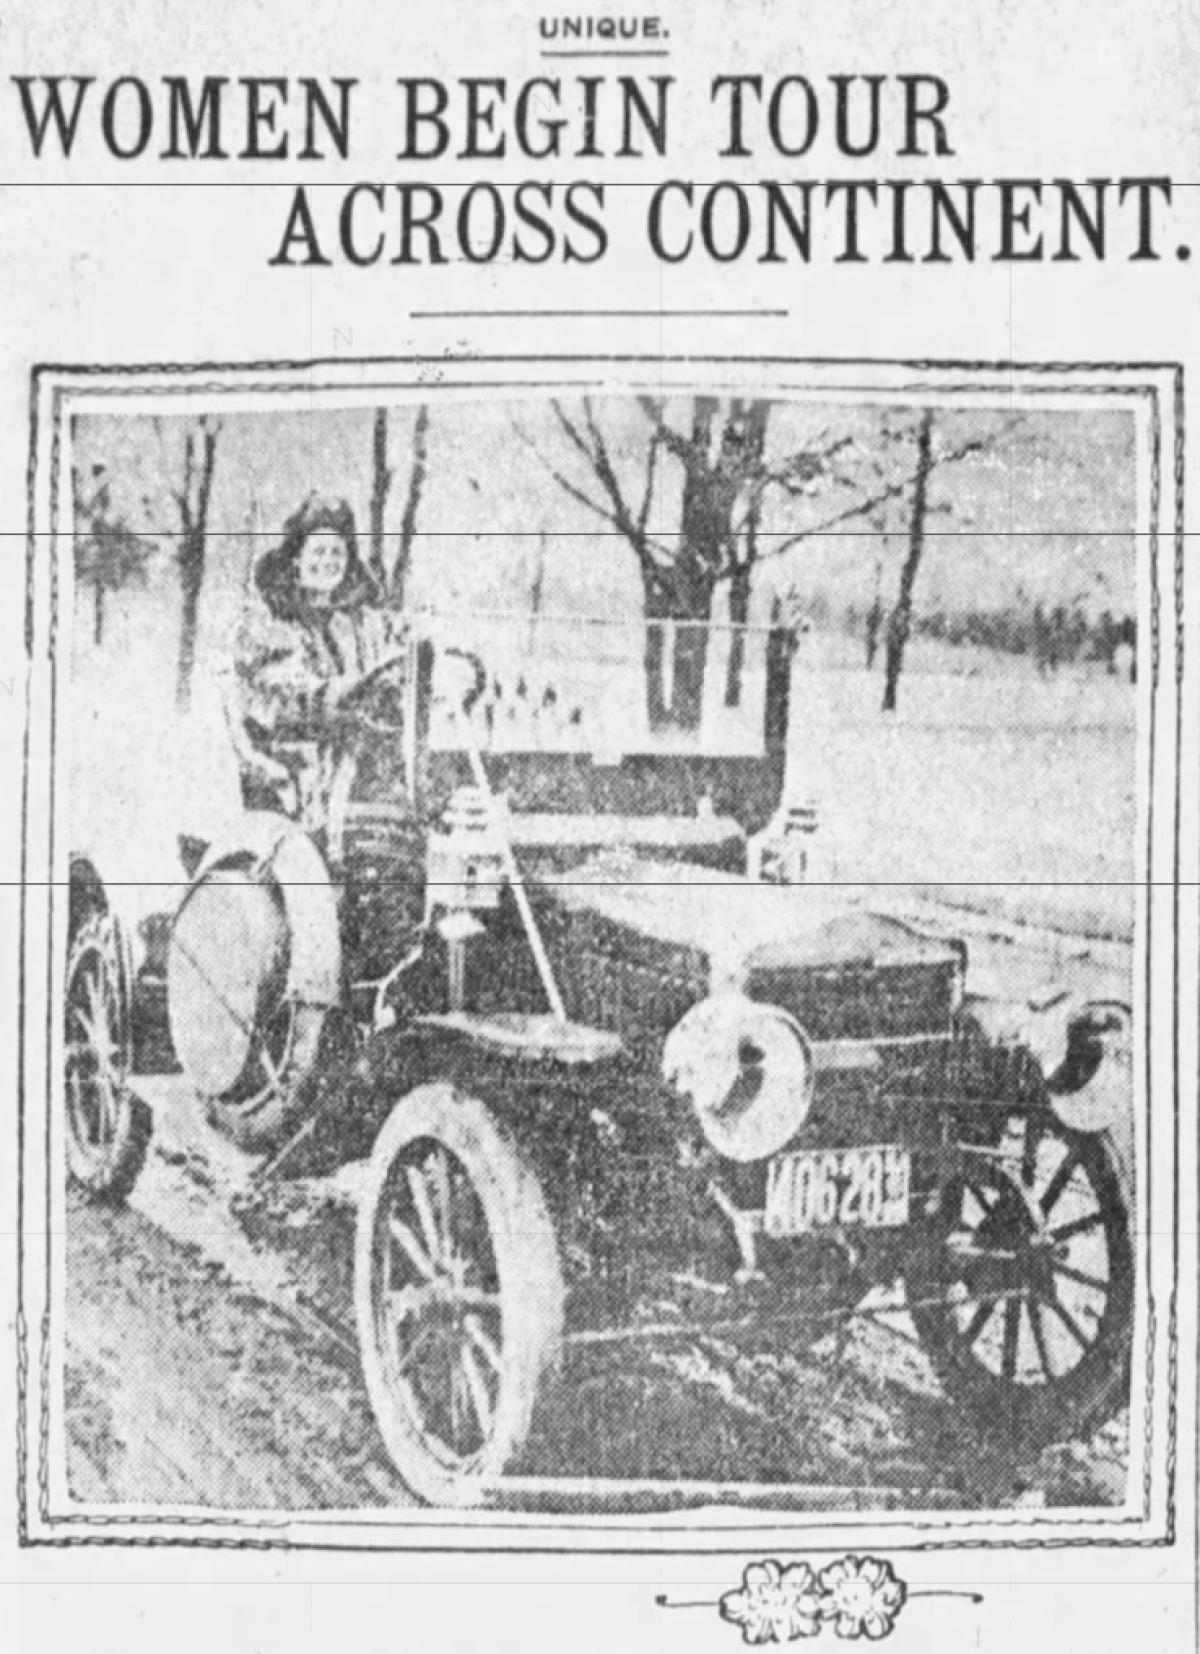 A newspaper clipping shows a woman in an automobile.